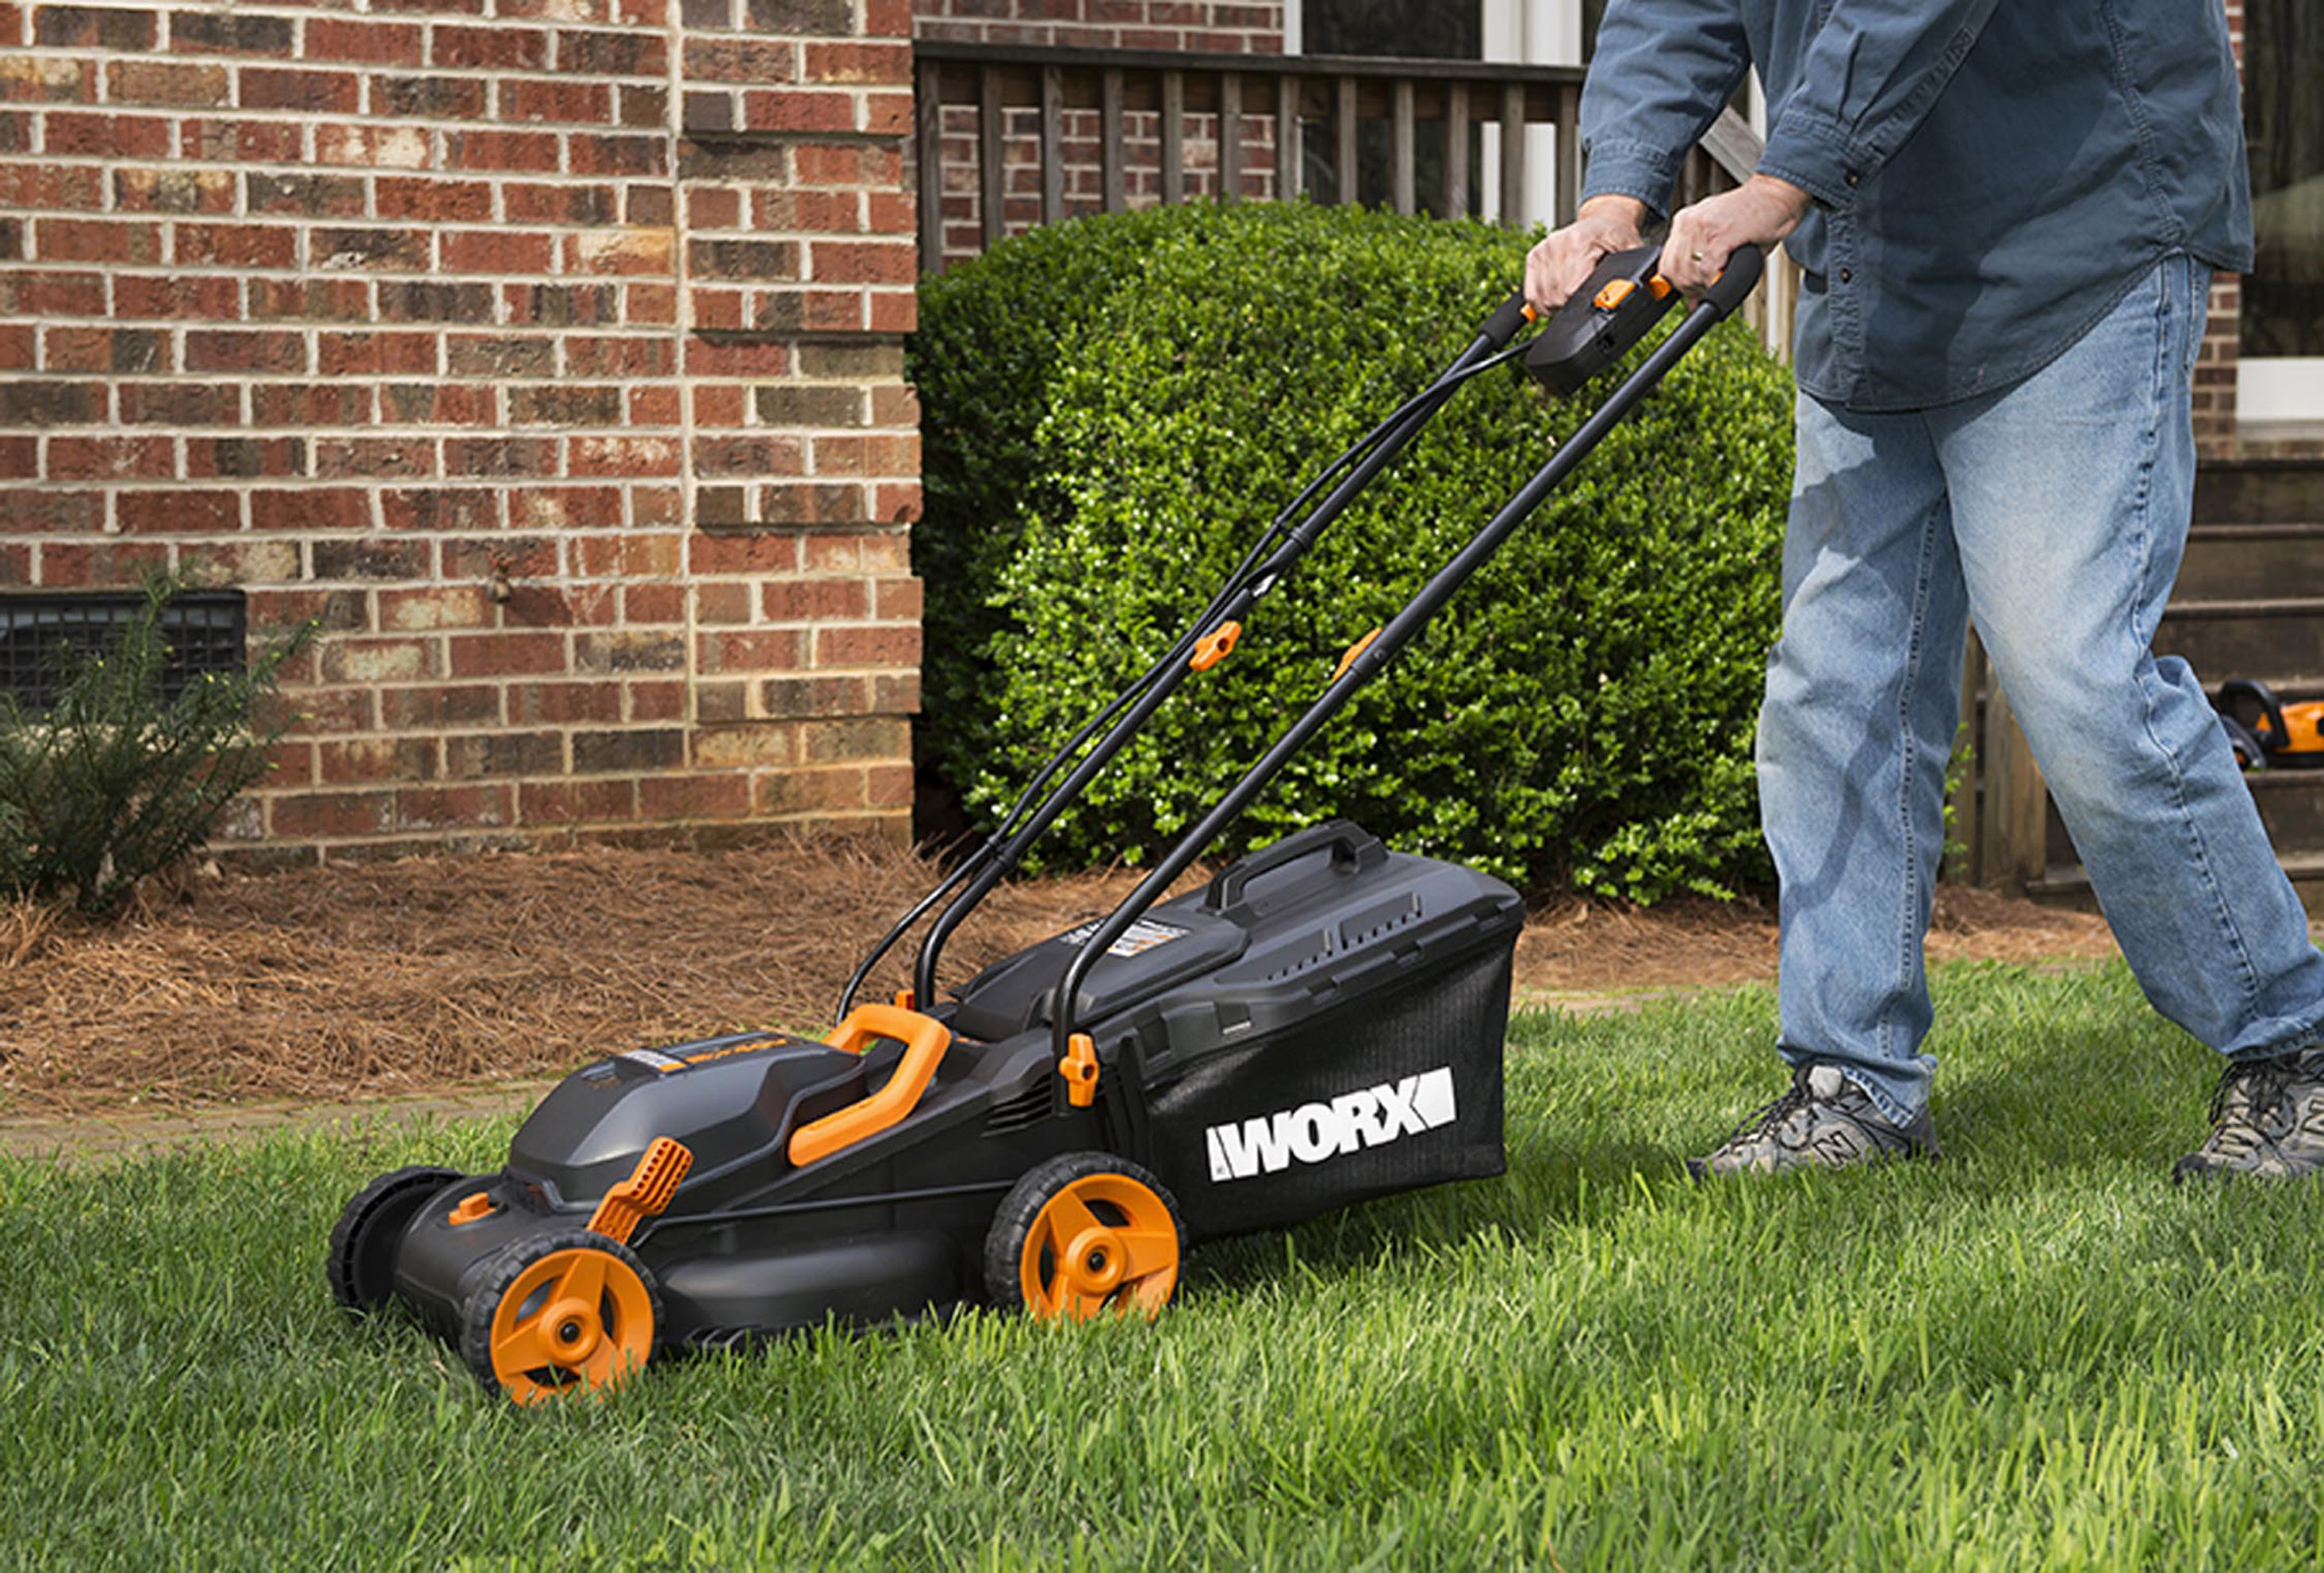 WORX 20V MAX, 14 in. Lawnmower is lightweight and highly maneuverable.